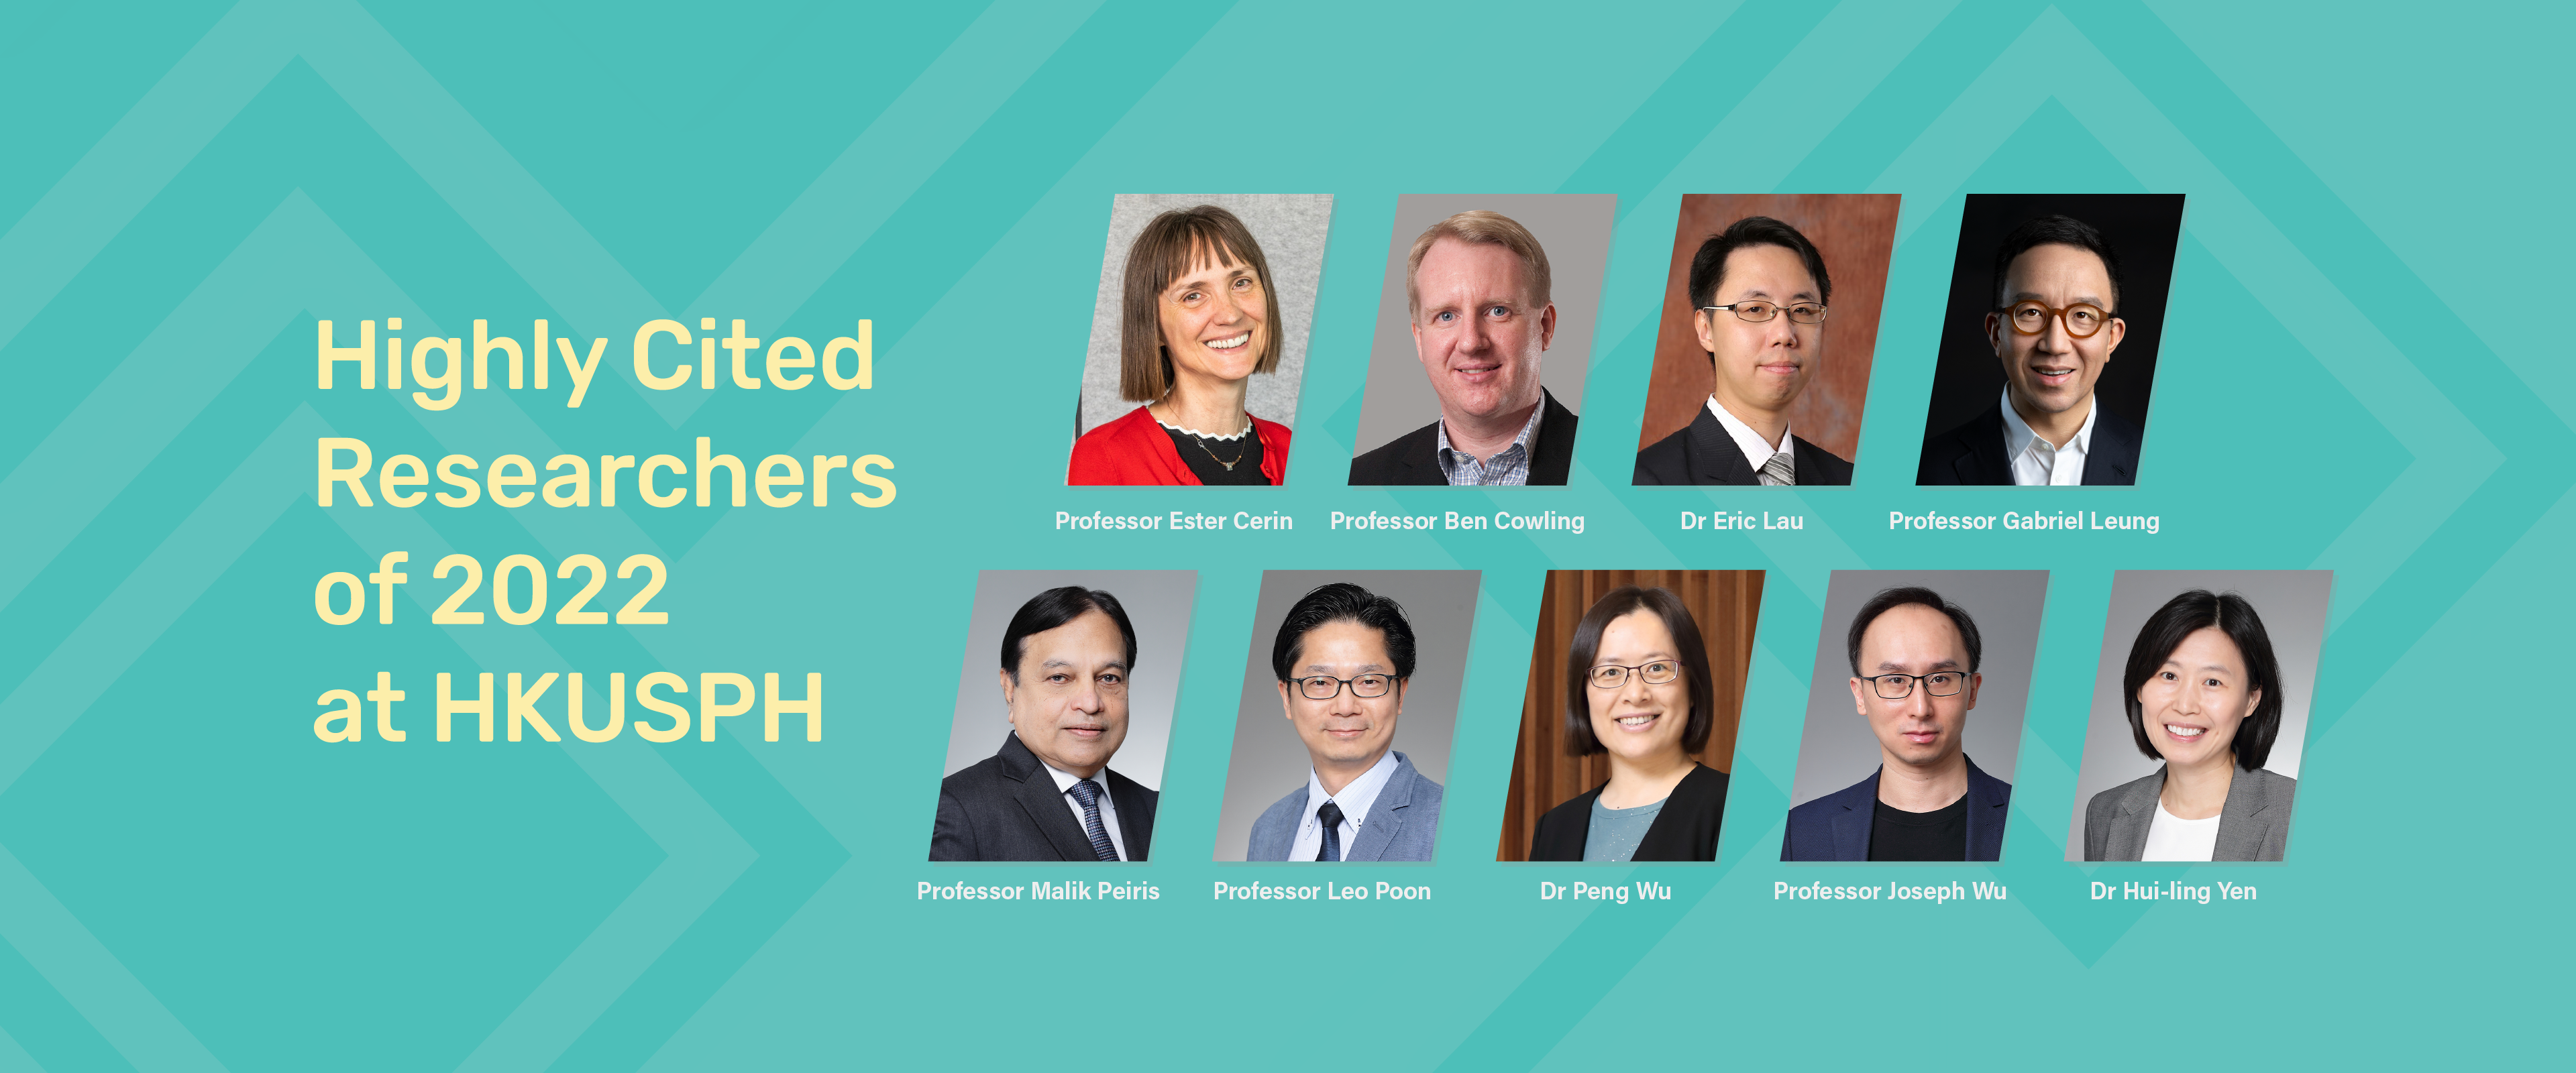 Highly Cited Researchers of 2022 at HKUSPH